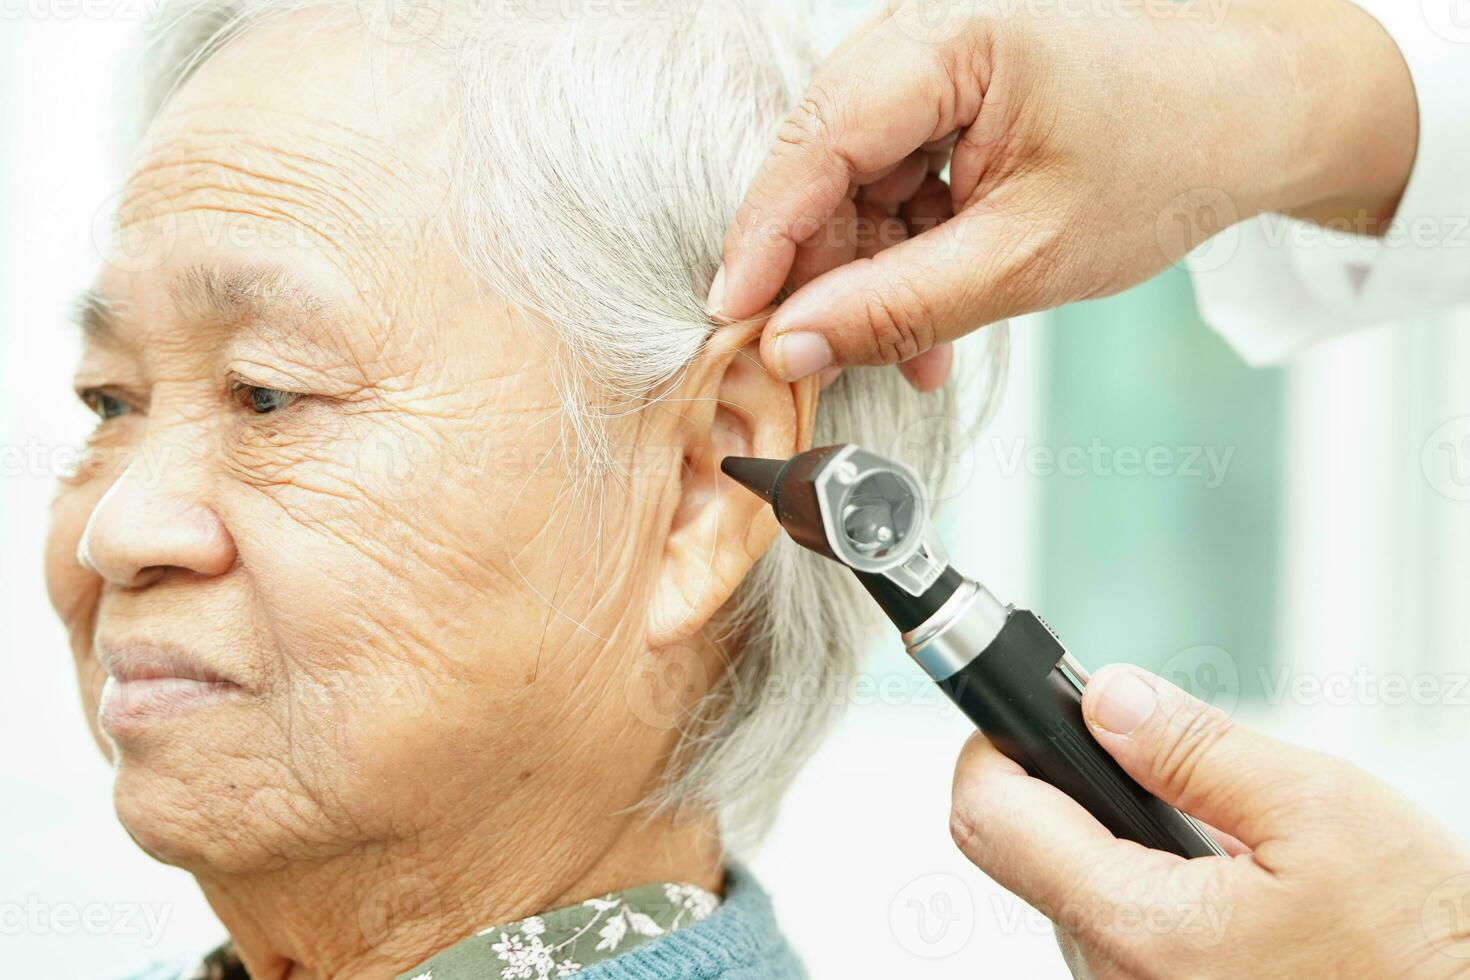 Otolaryngologist or ENT physician doctor examining senior patient ear with otoscope, hearing loss problem. photo